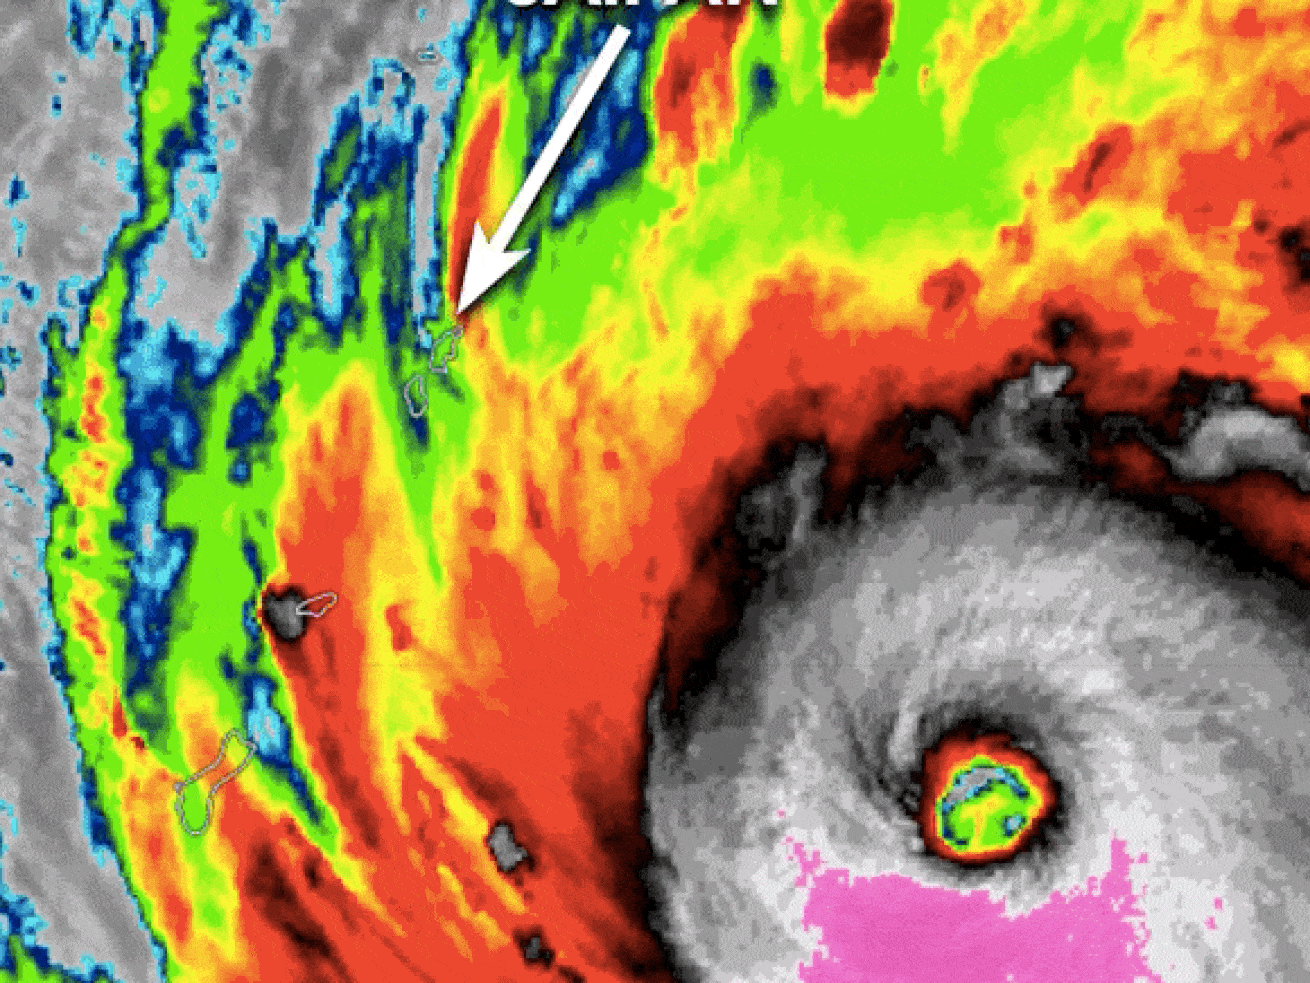 Super Typhoon Yutu, the strongest storm of the year, just hit US territories